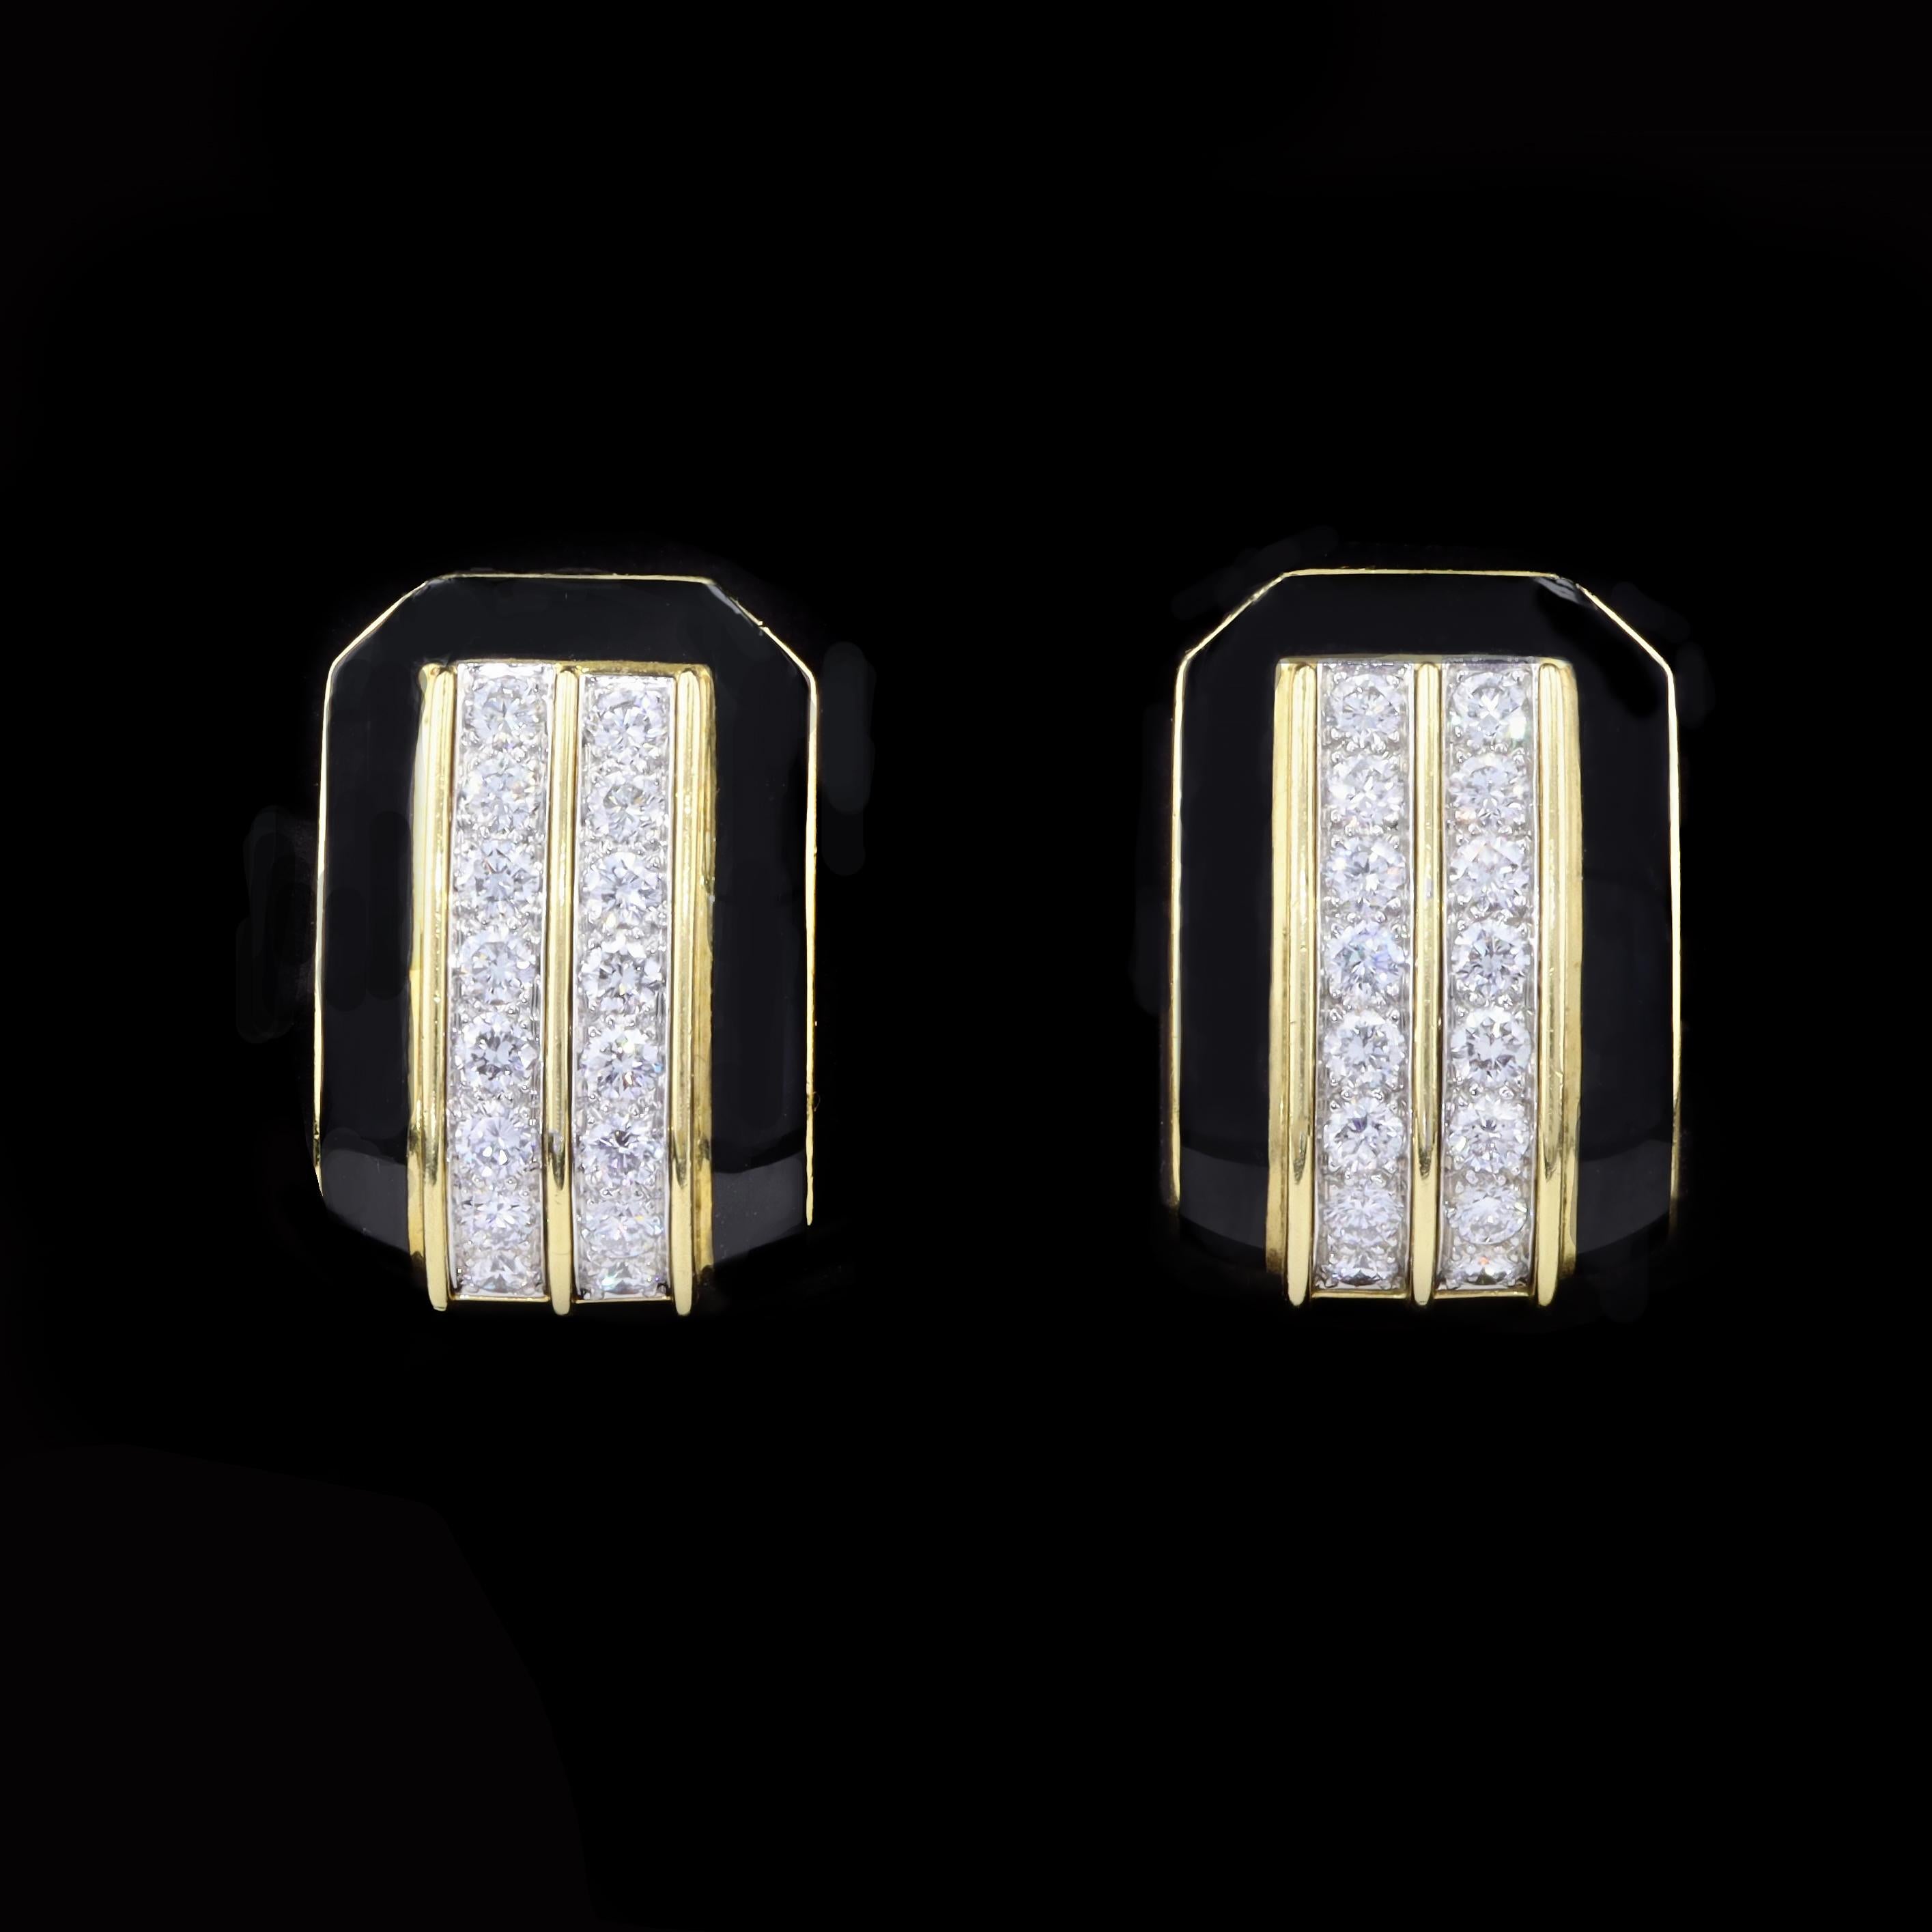 Score a fabulous fashion touchdown with these vintage circa 1970’s 18K yellow gold diamond earrings. Black enamel provides a striking contrast to yellow gold in these earclip earrings that feature 32 sparkling round cut diamonds weighing